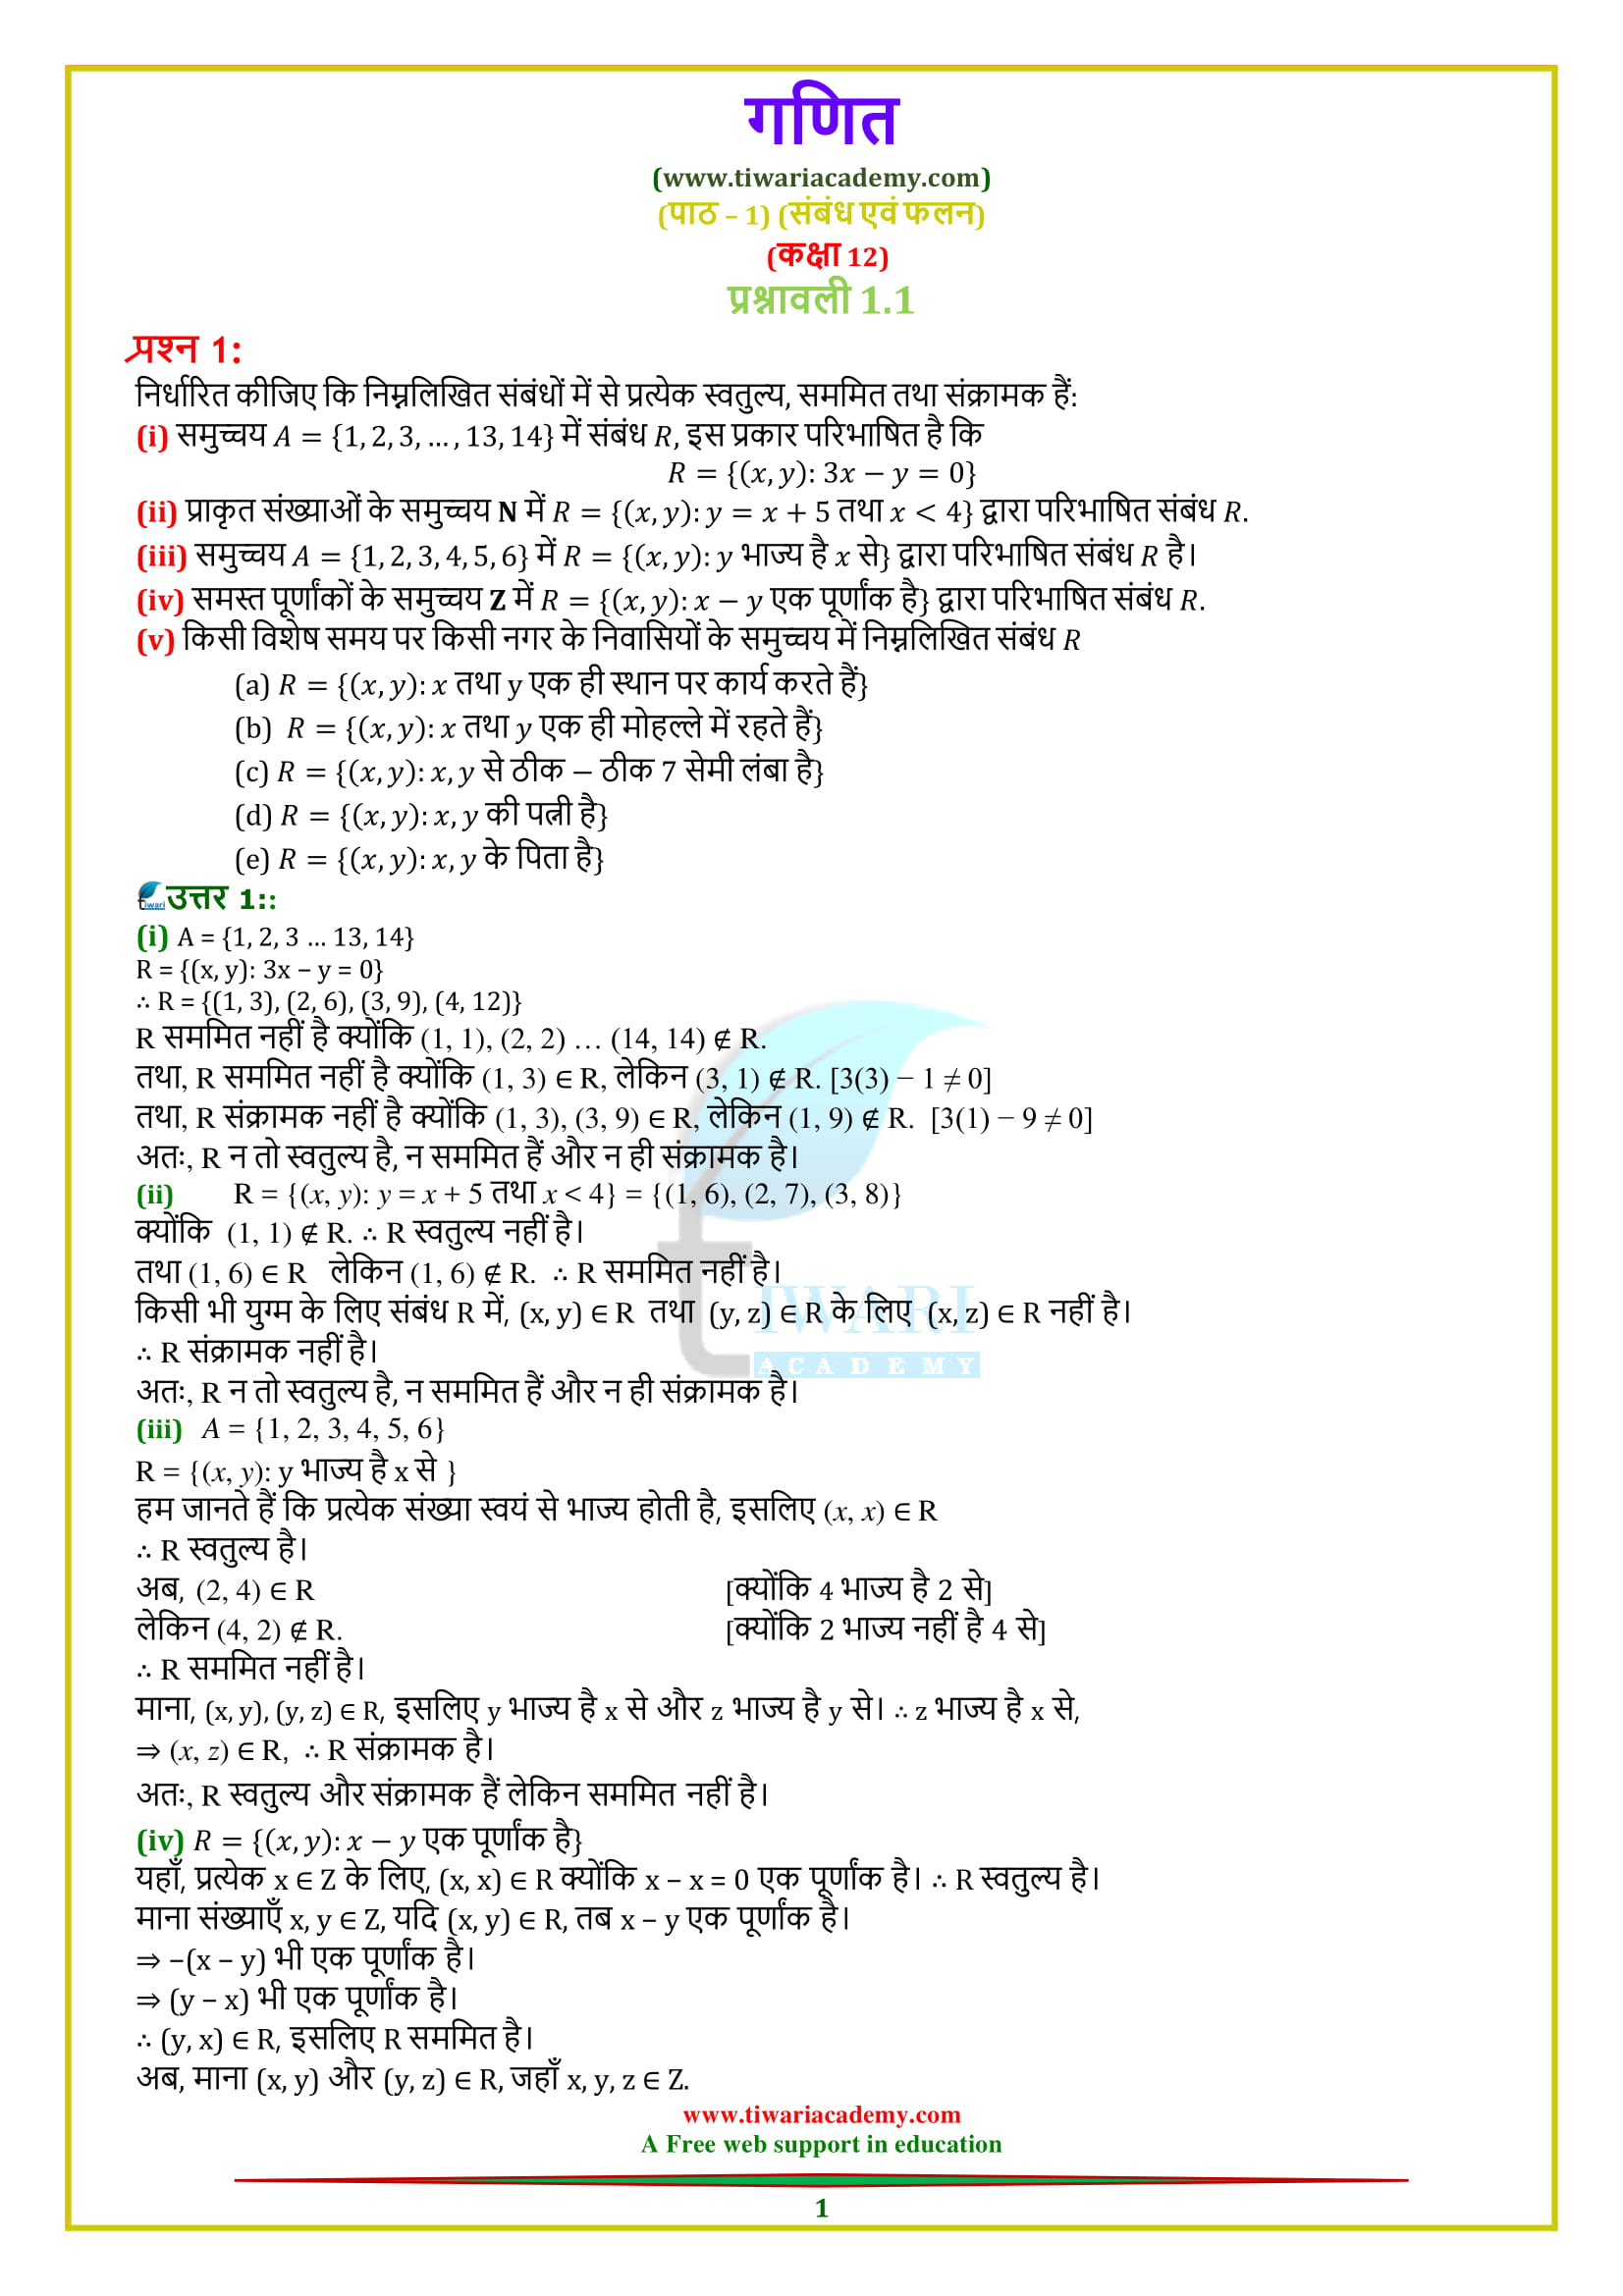 Class 12 Maths Chapter 1 Exercise 1.1 solutions in Hindi